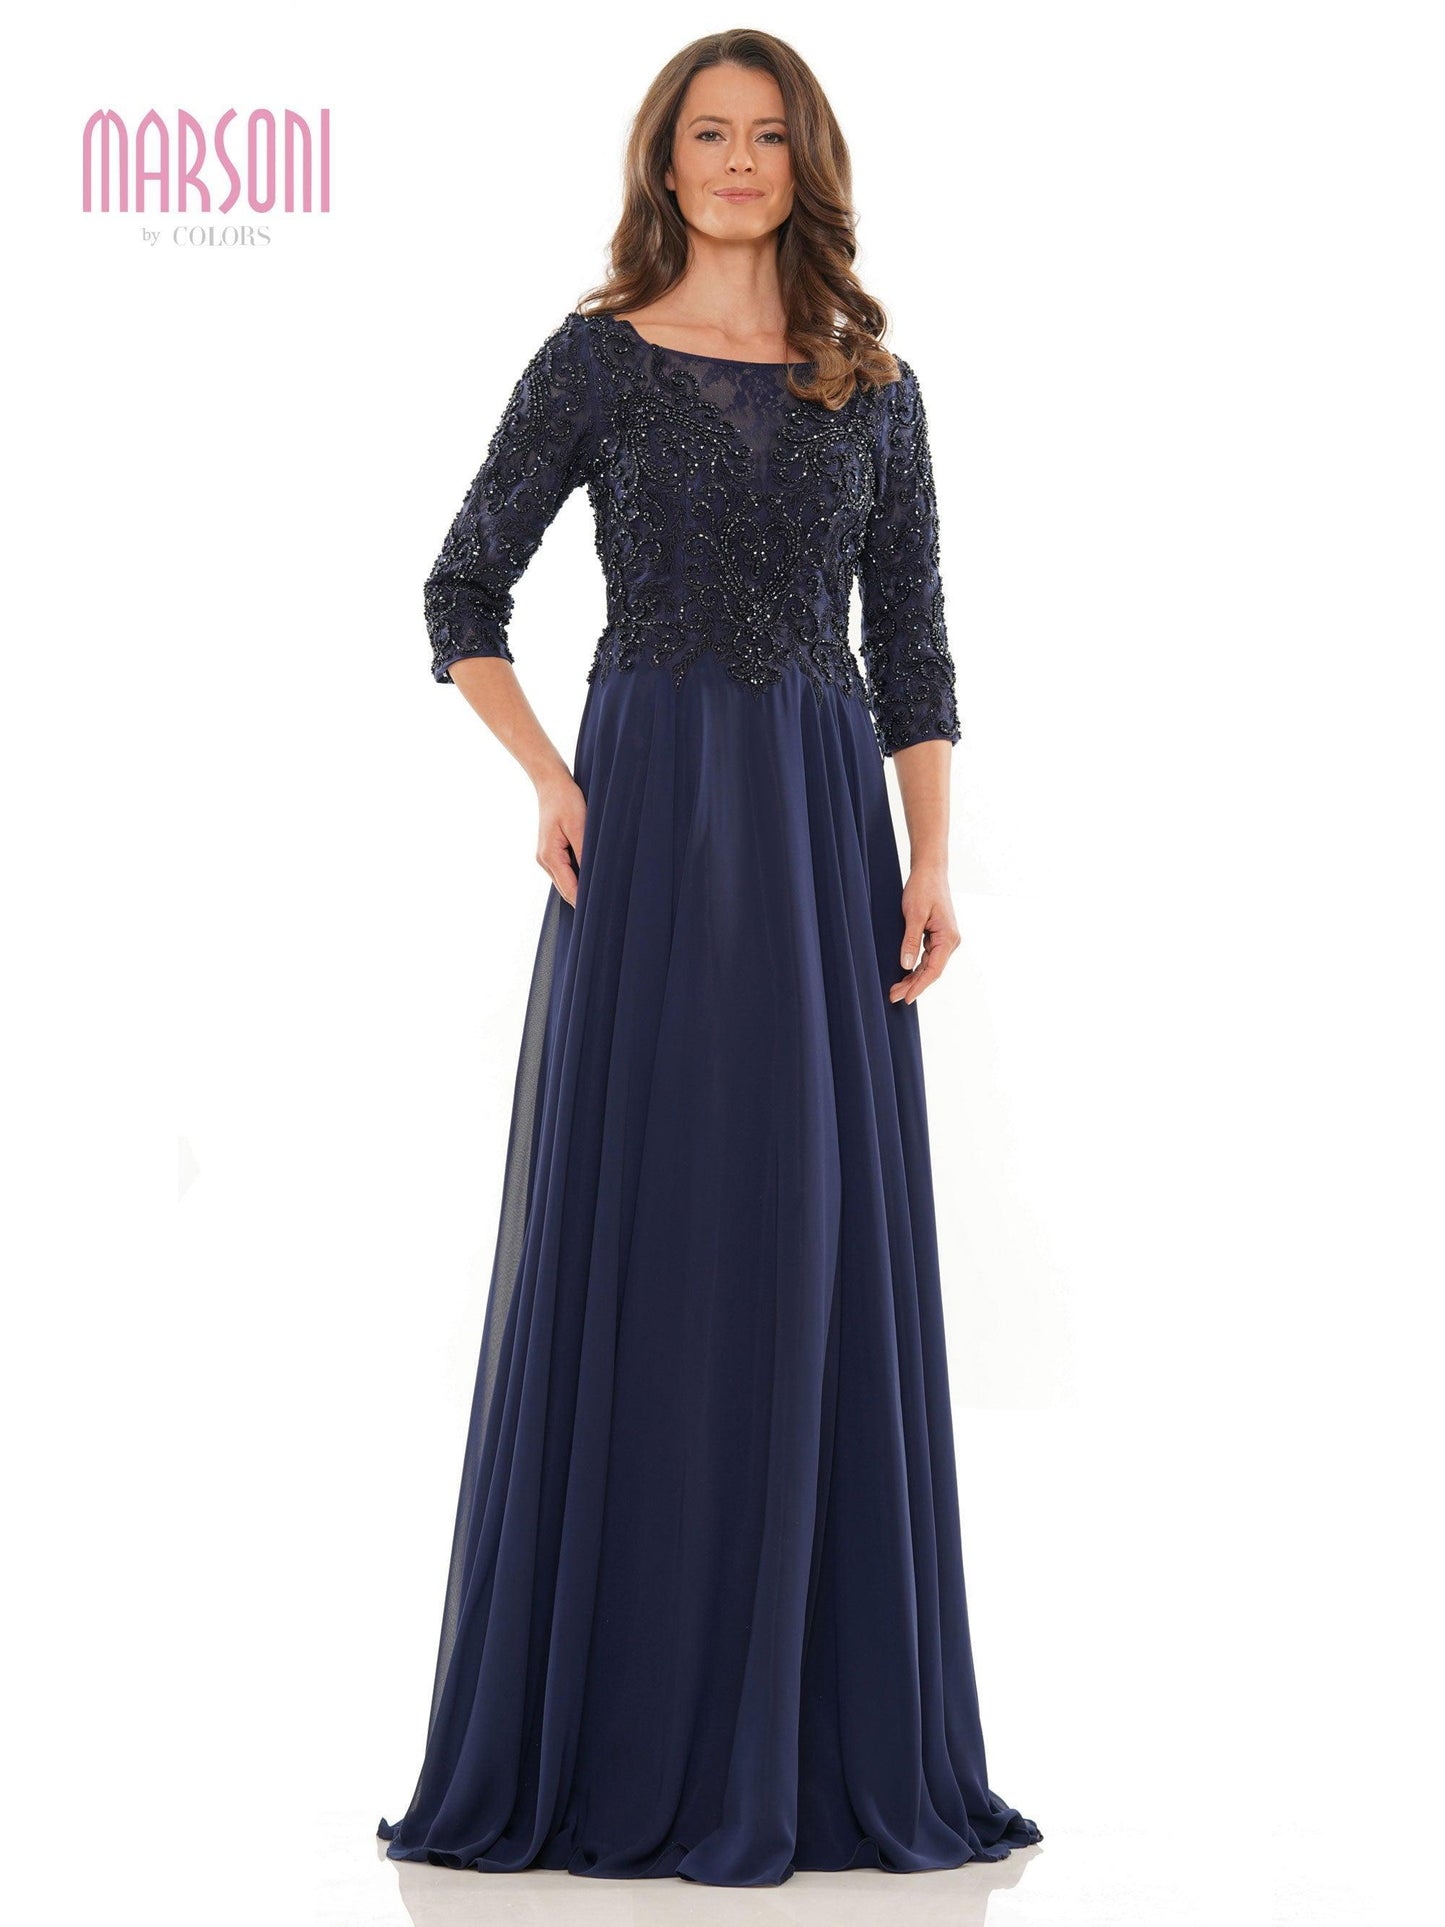 Marsoni Mother of the Bride A Line Long Dress Sale 1052 - The Dress Outlet